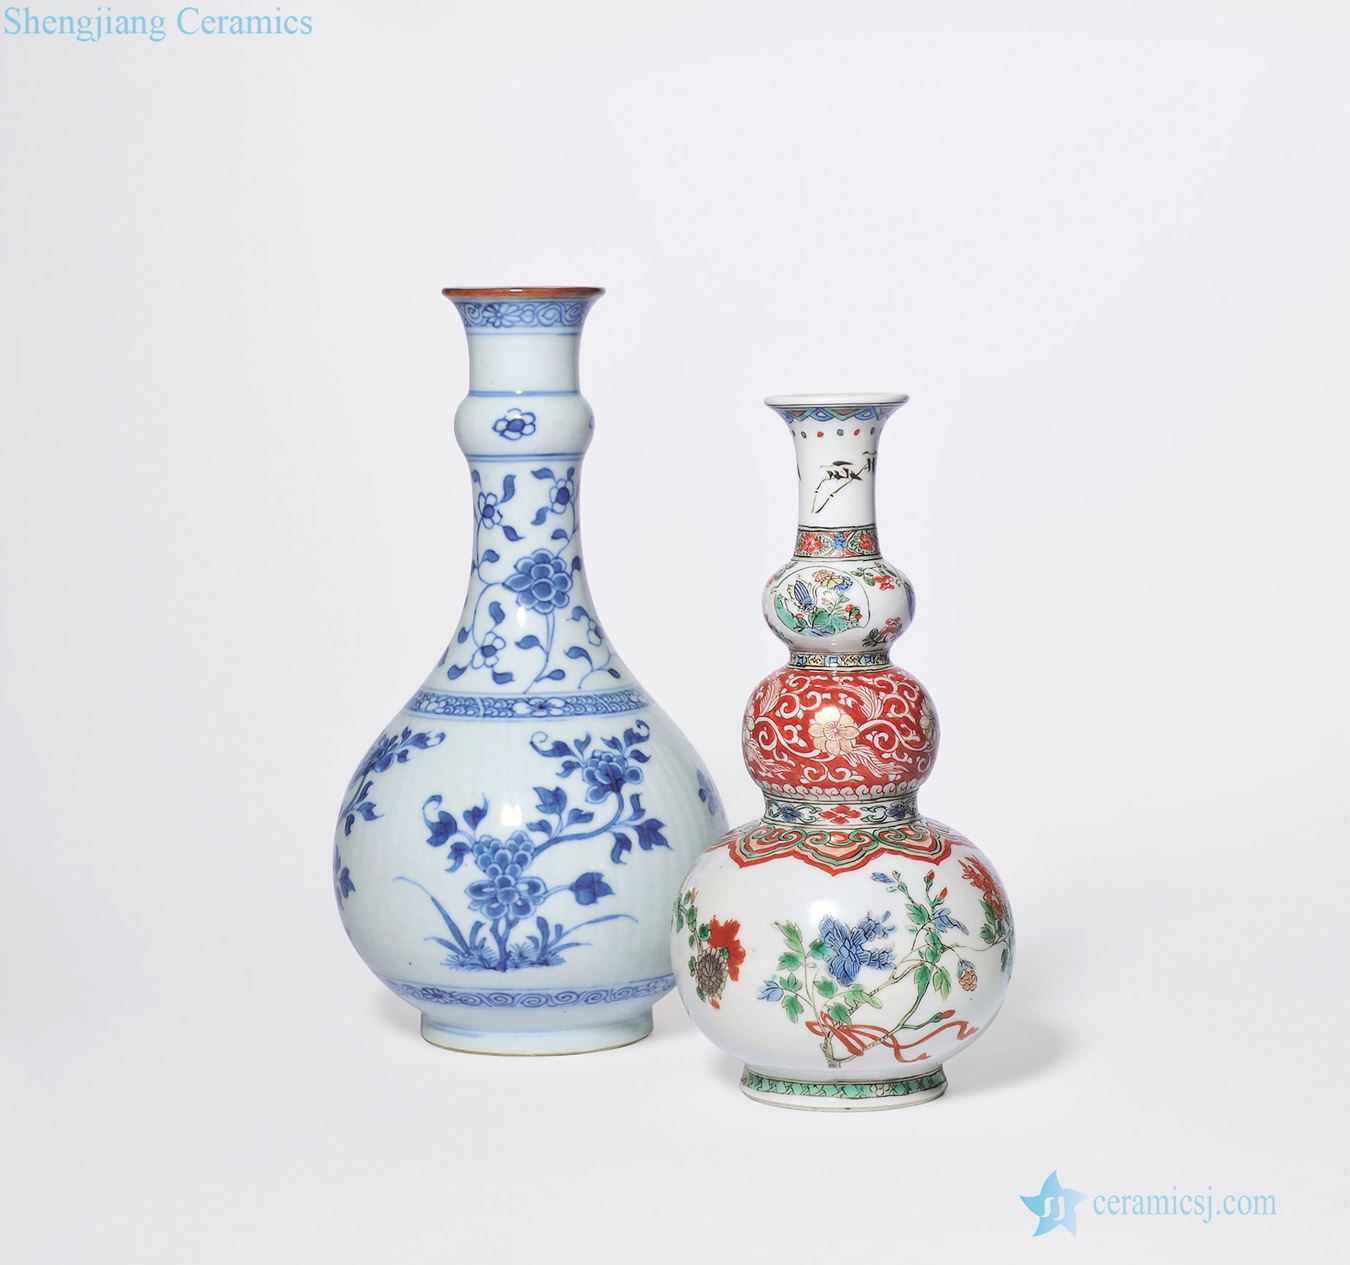 The qing emperor kangxi colorful flower bottle gourd, blue and white flowers lines bottles of each one